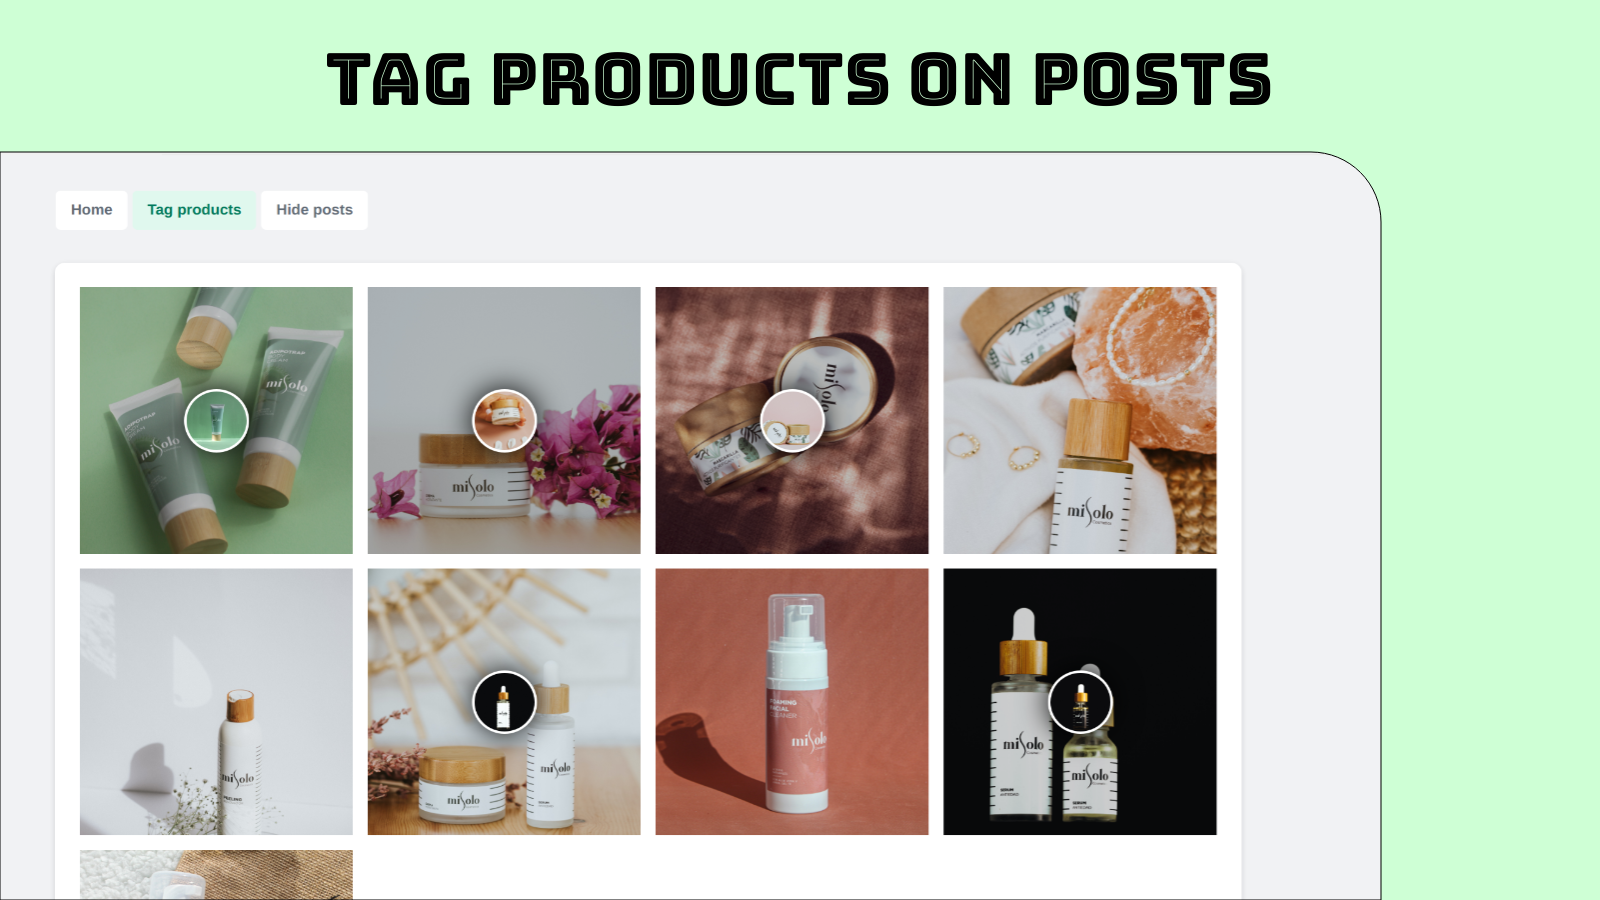 Tag products on posts